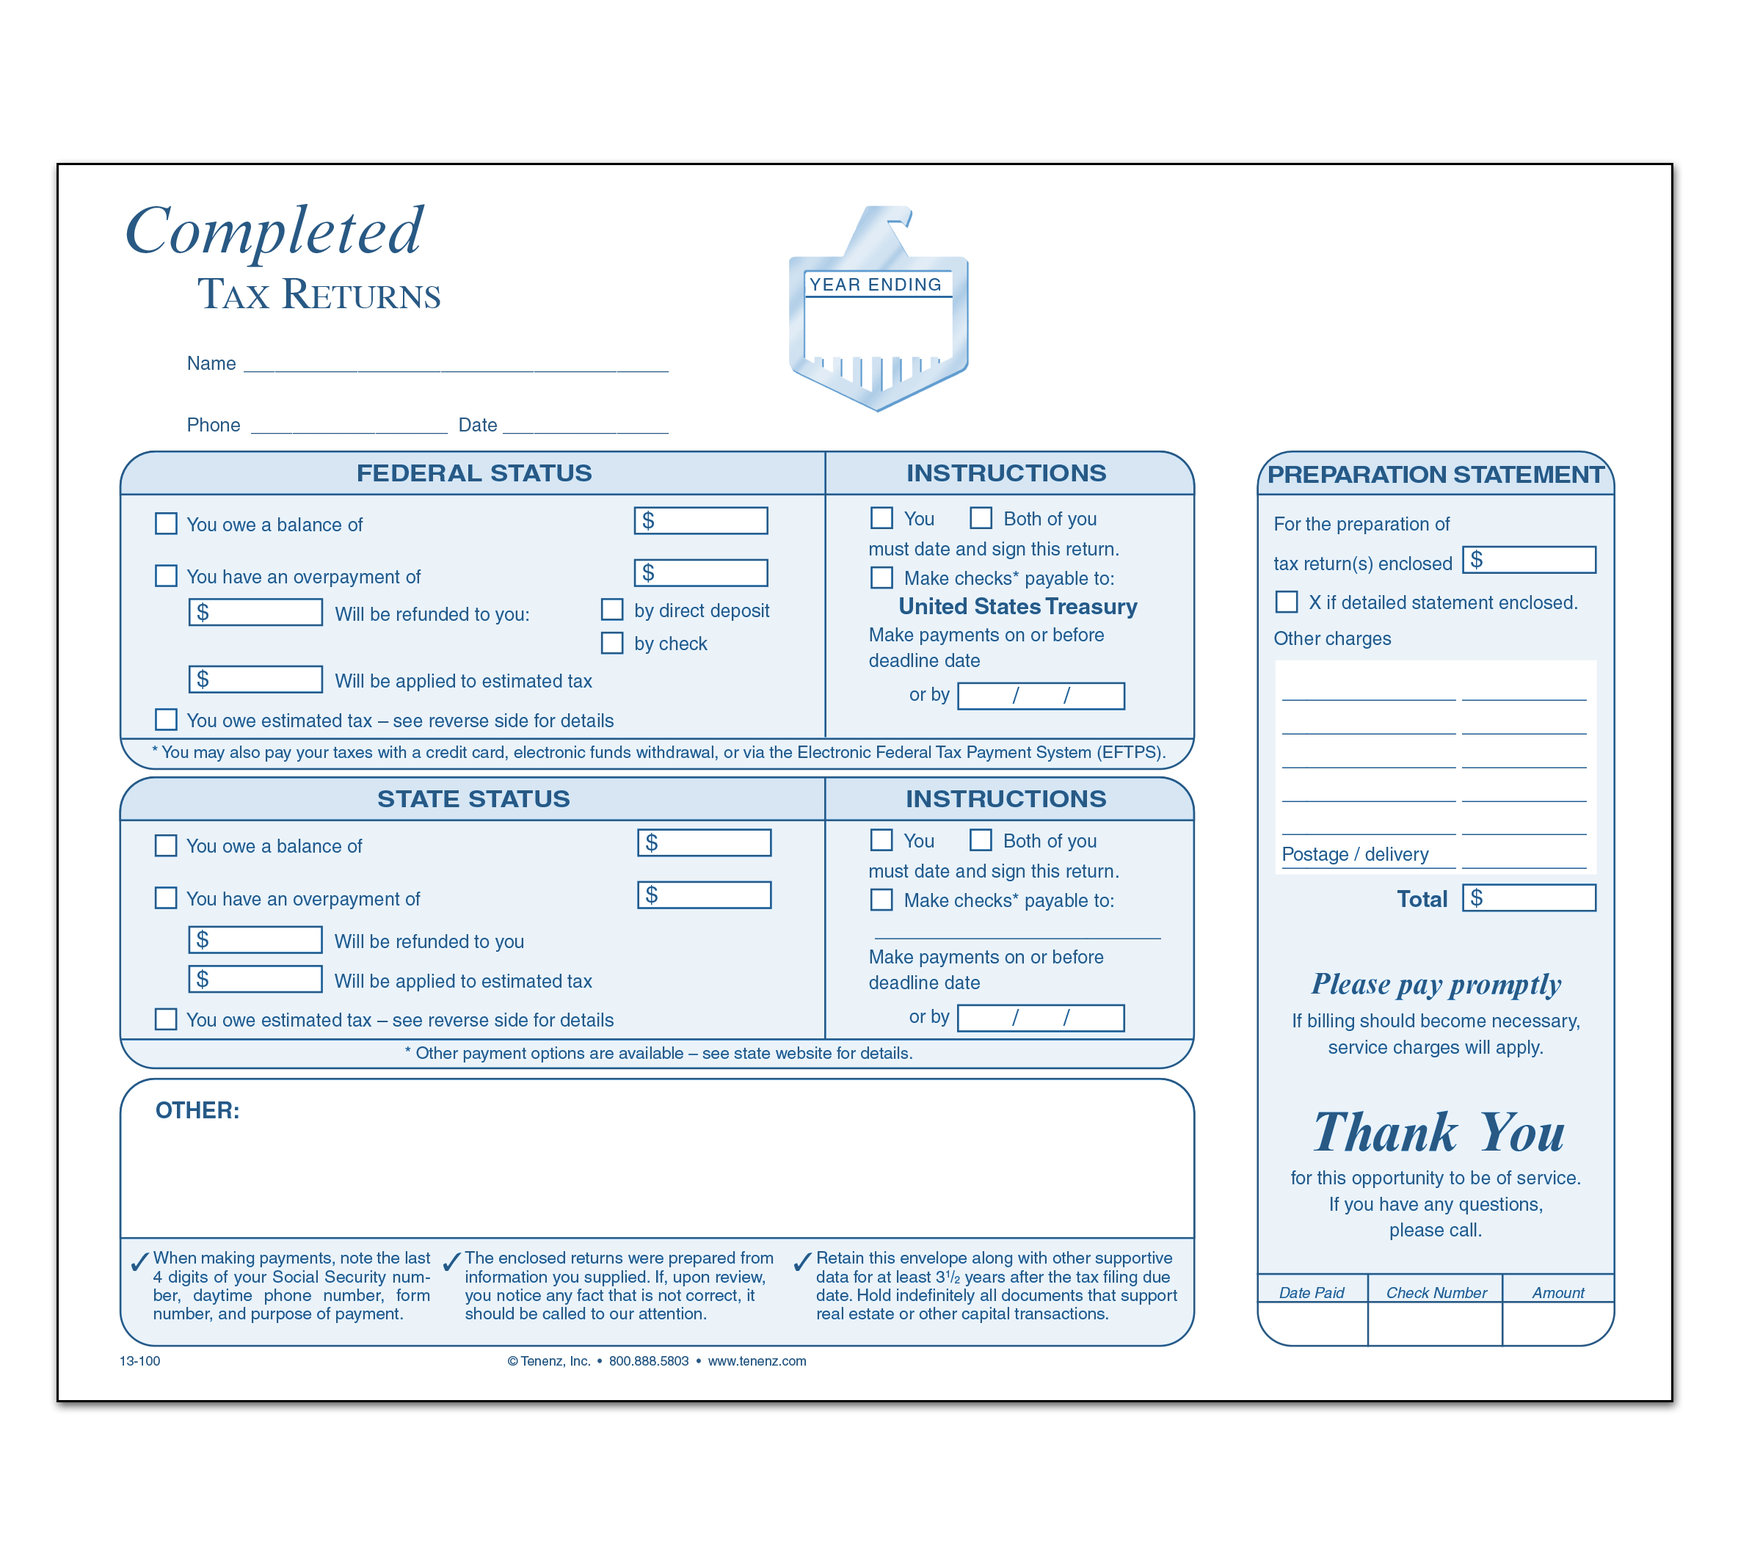 9 x 12 Open End Tax Envelopes | Easily Send and Organize Important Tax Documents This Tax Season 50 Qty. 24lb 8193-TAX-50 Bright White Preprinted Income Tax Return Design 